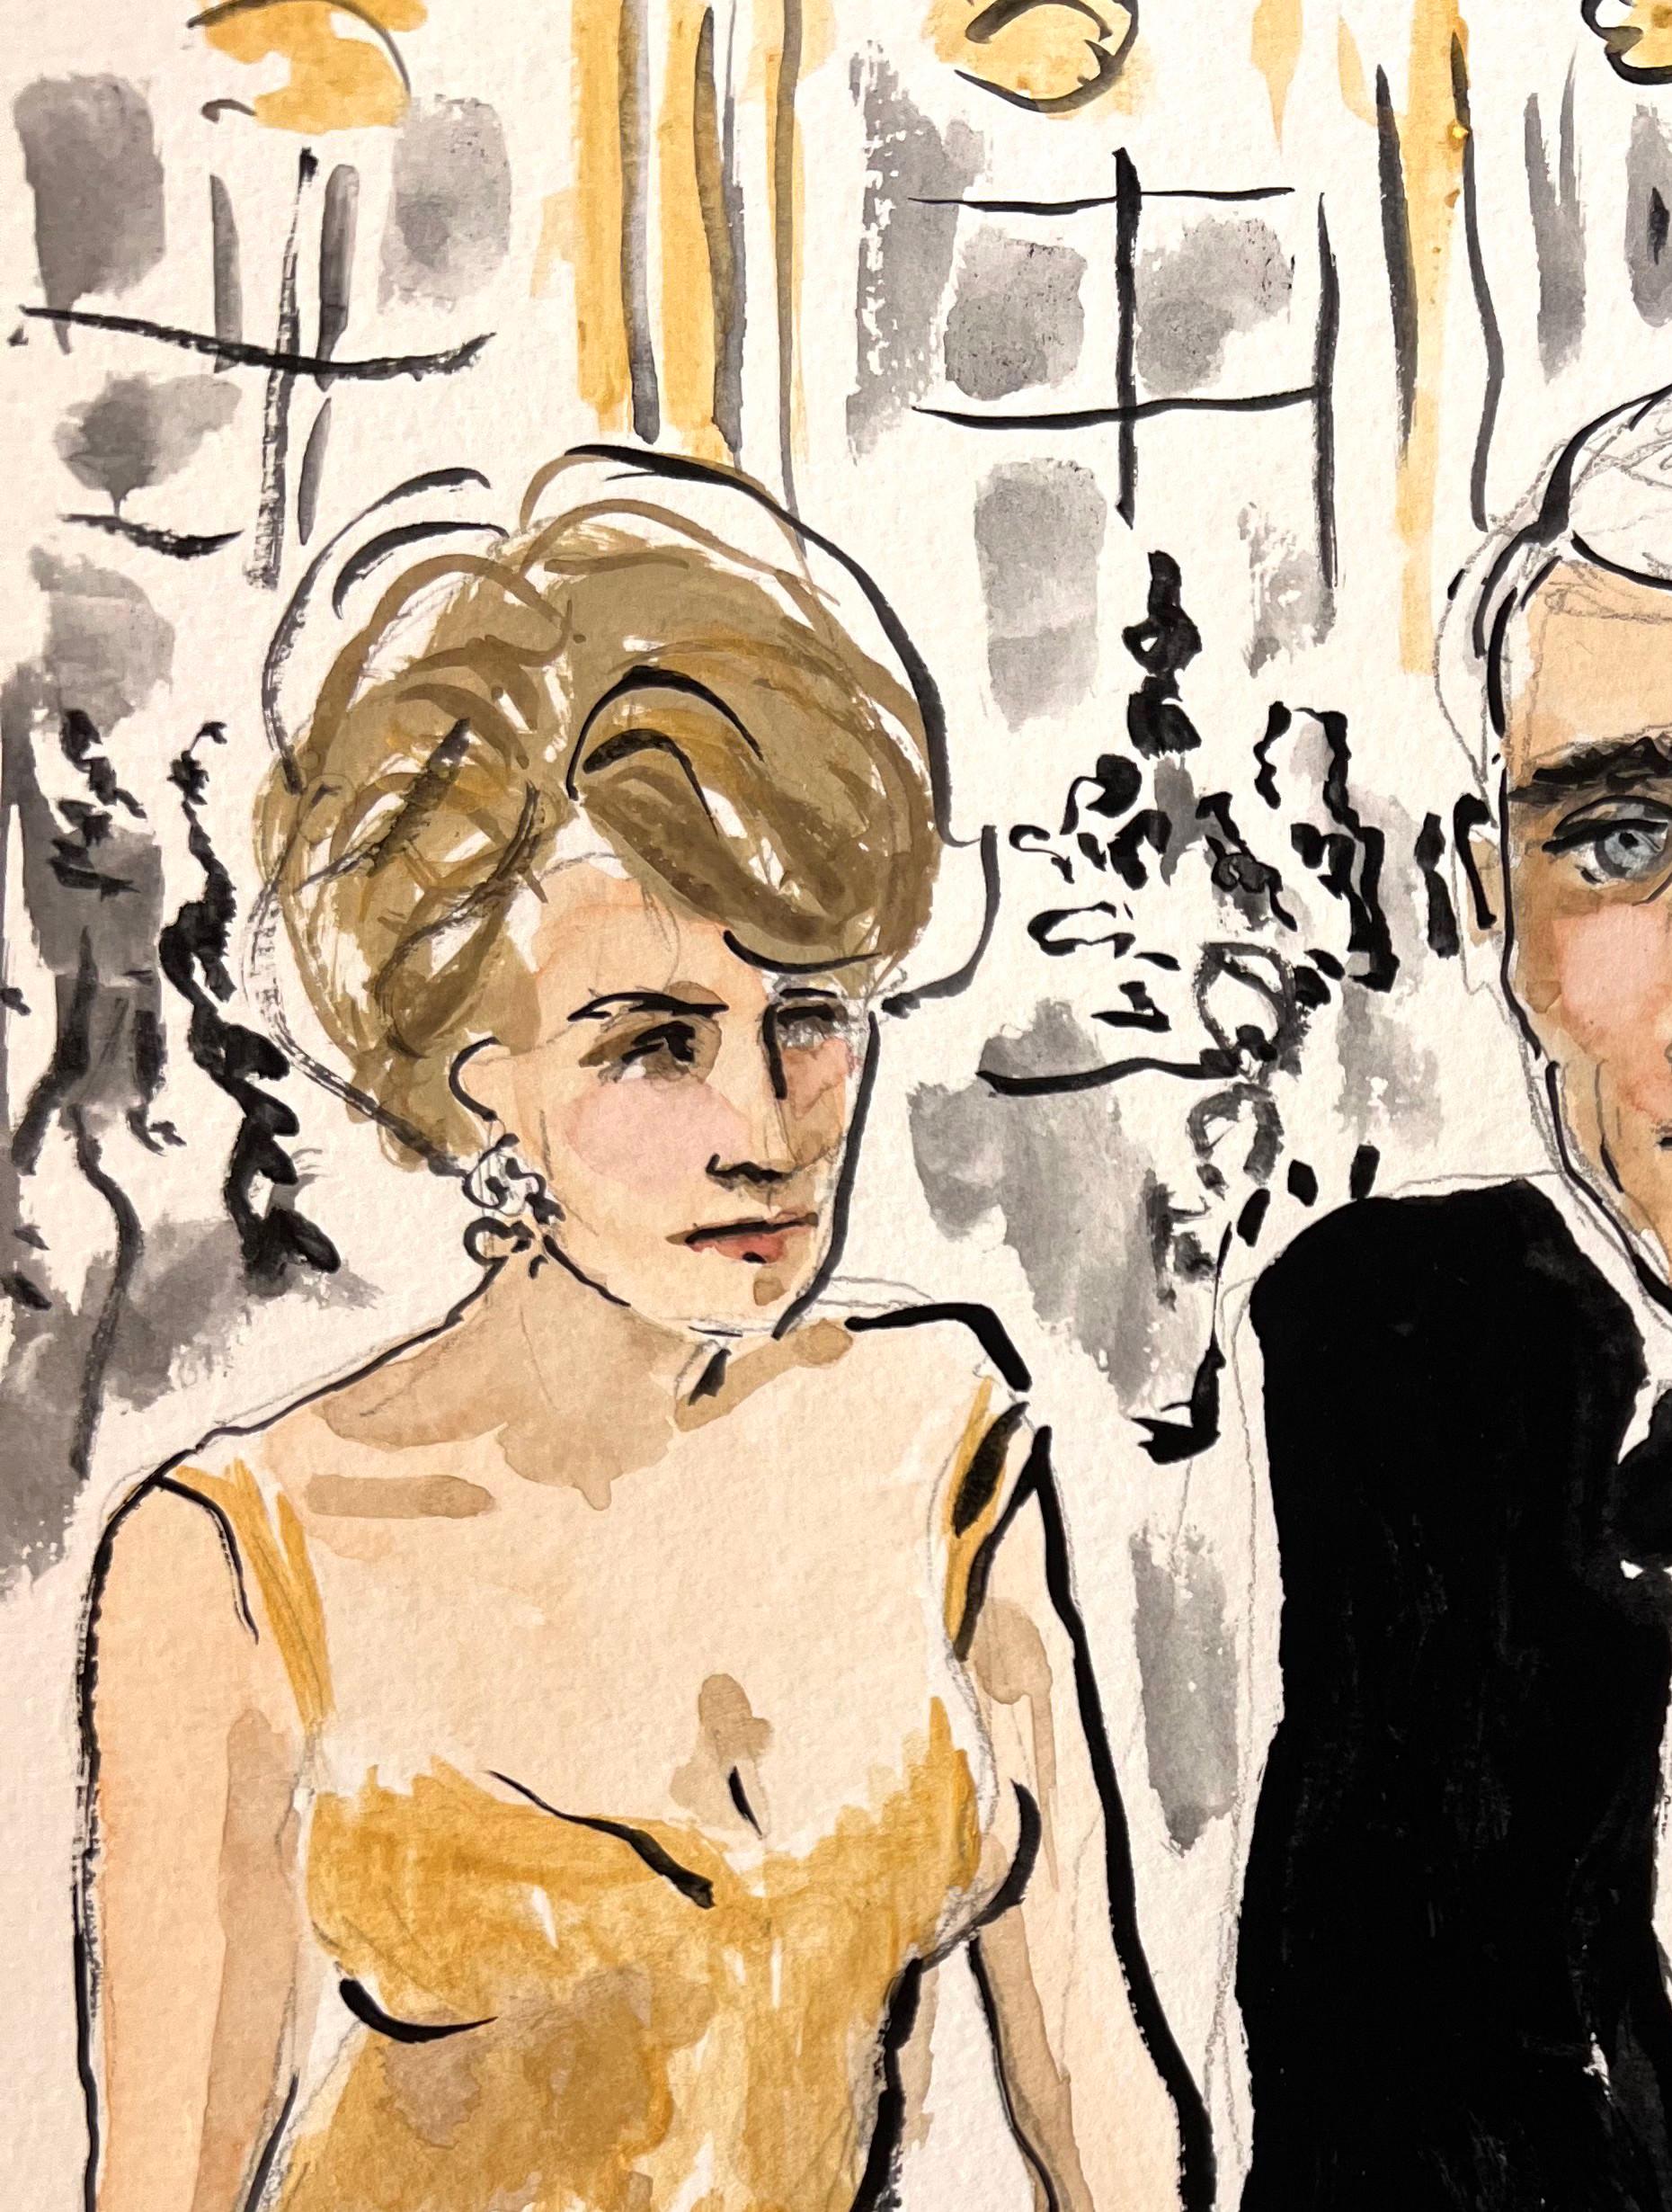 Angie Dickinson and Burt Bacharach in Hollywood in 1968. Watercolor on paper - Painting by Manuel Santelices